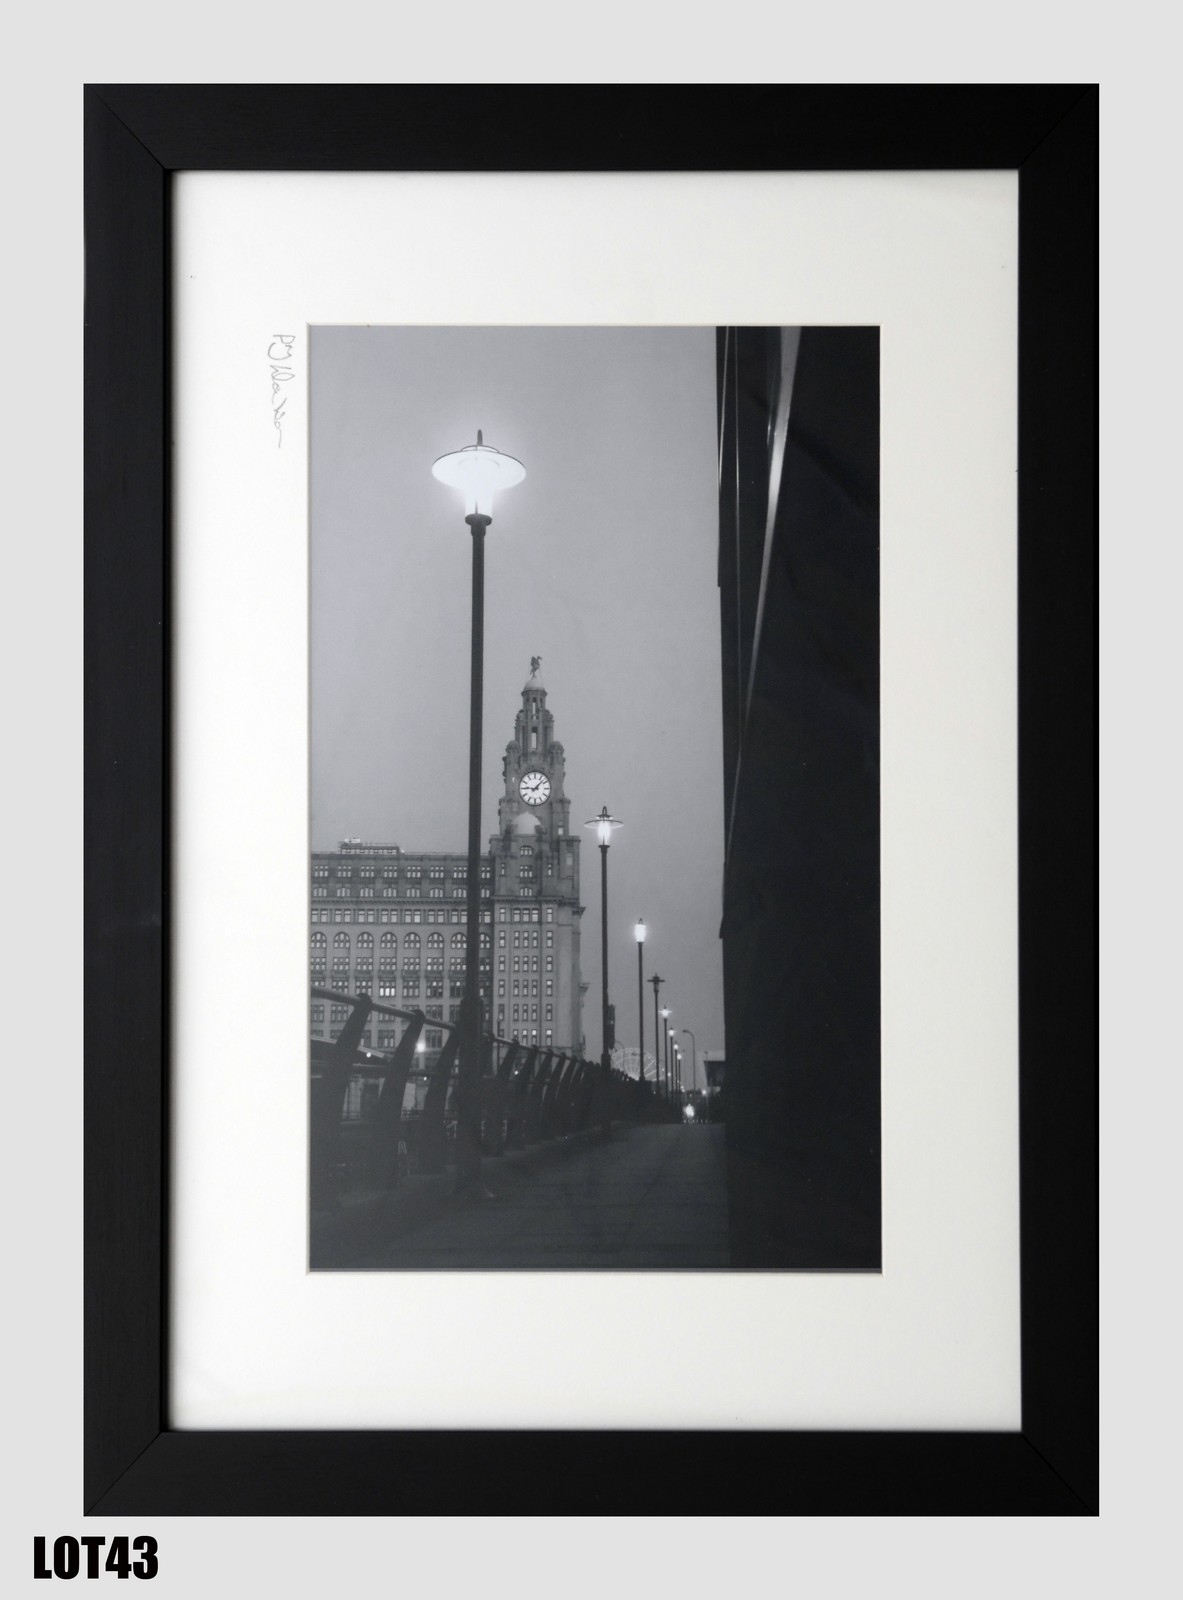 Untitled (21x29cm) by P. J. Dawson – mounted & framed. Paul is a native of Liverpool, having been